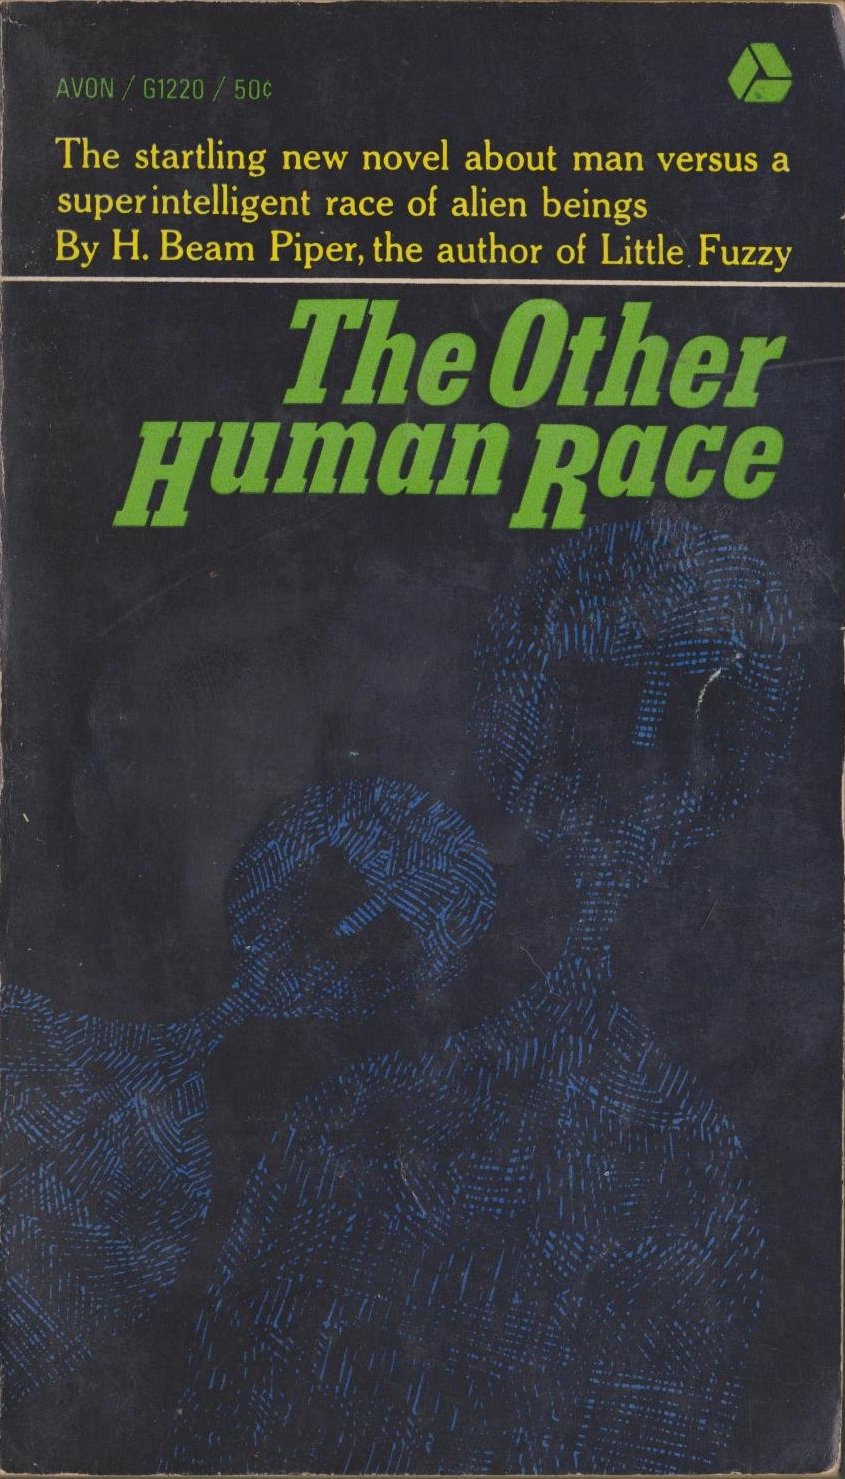 Image - cover of The Other Human Raceby H. Beam Piper, Avon 1964